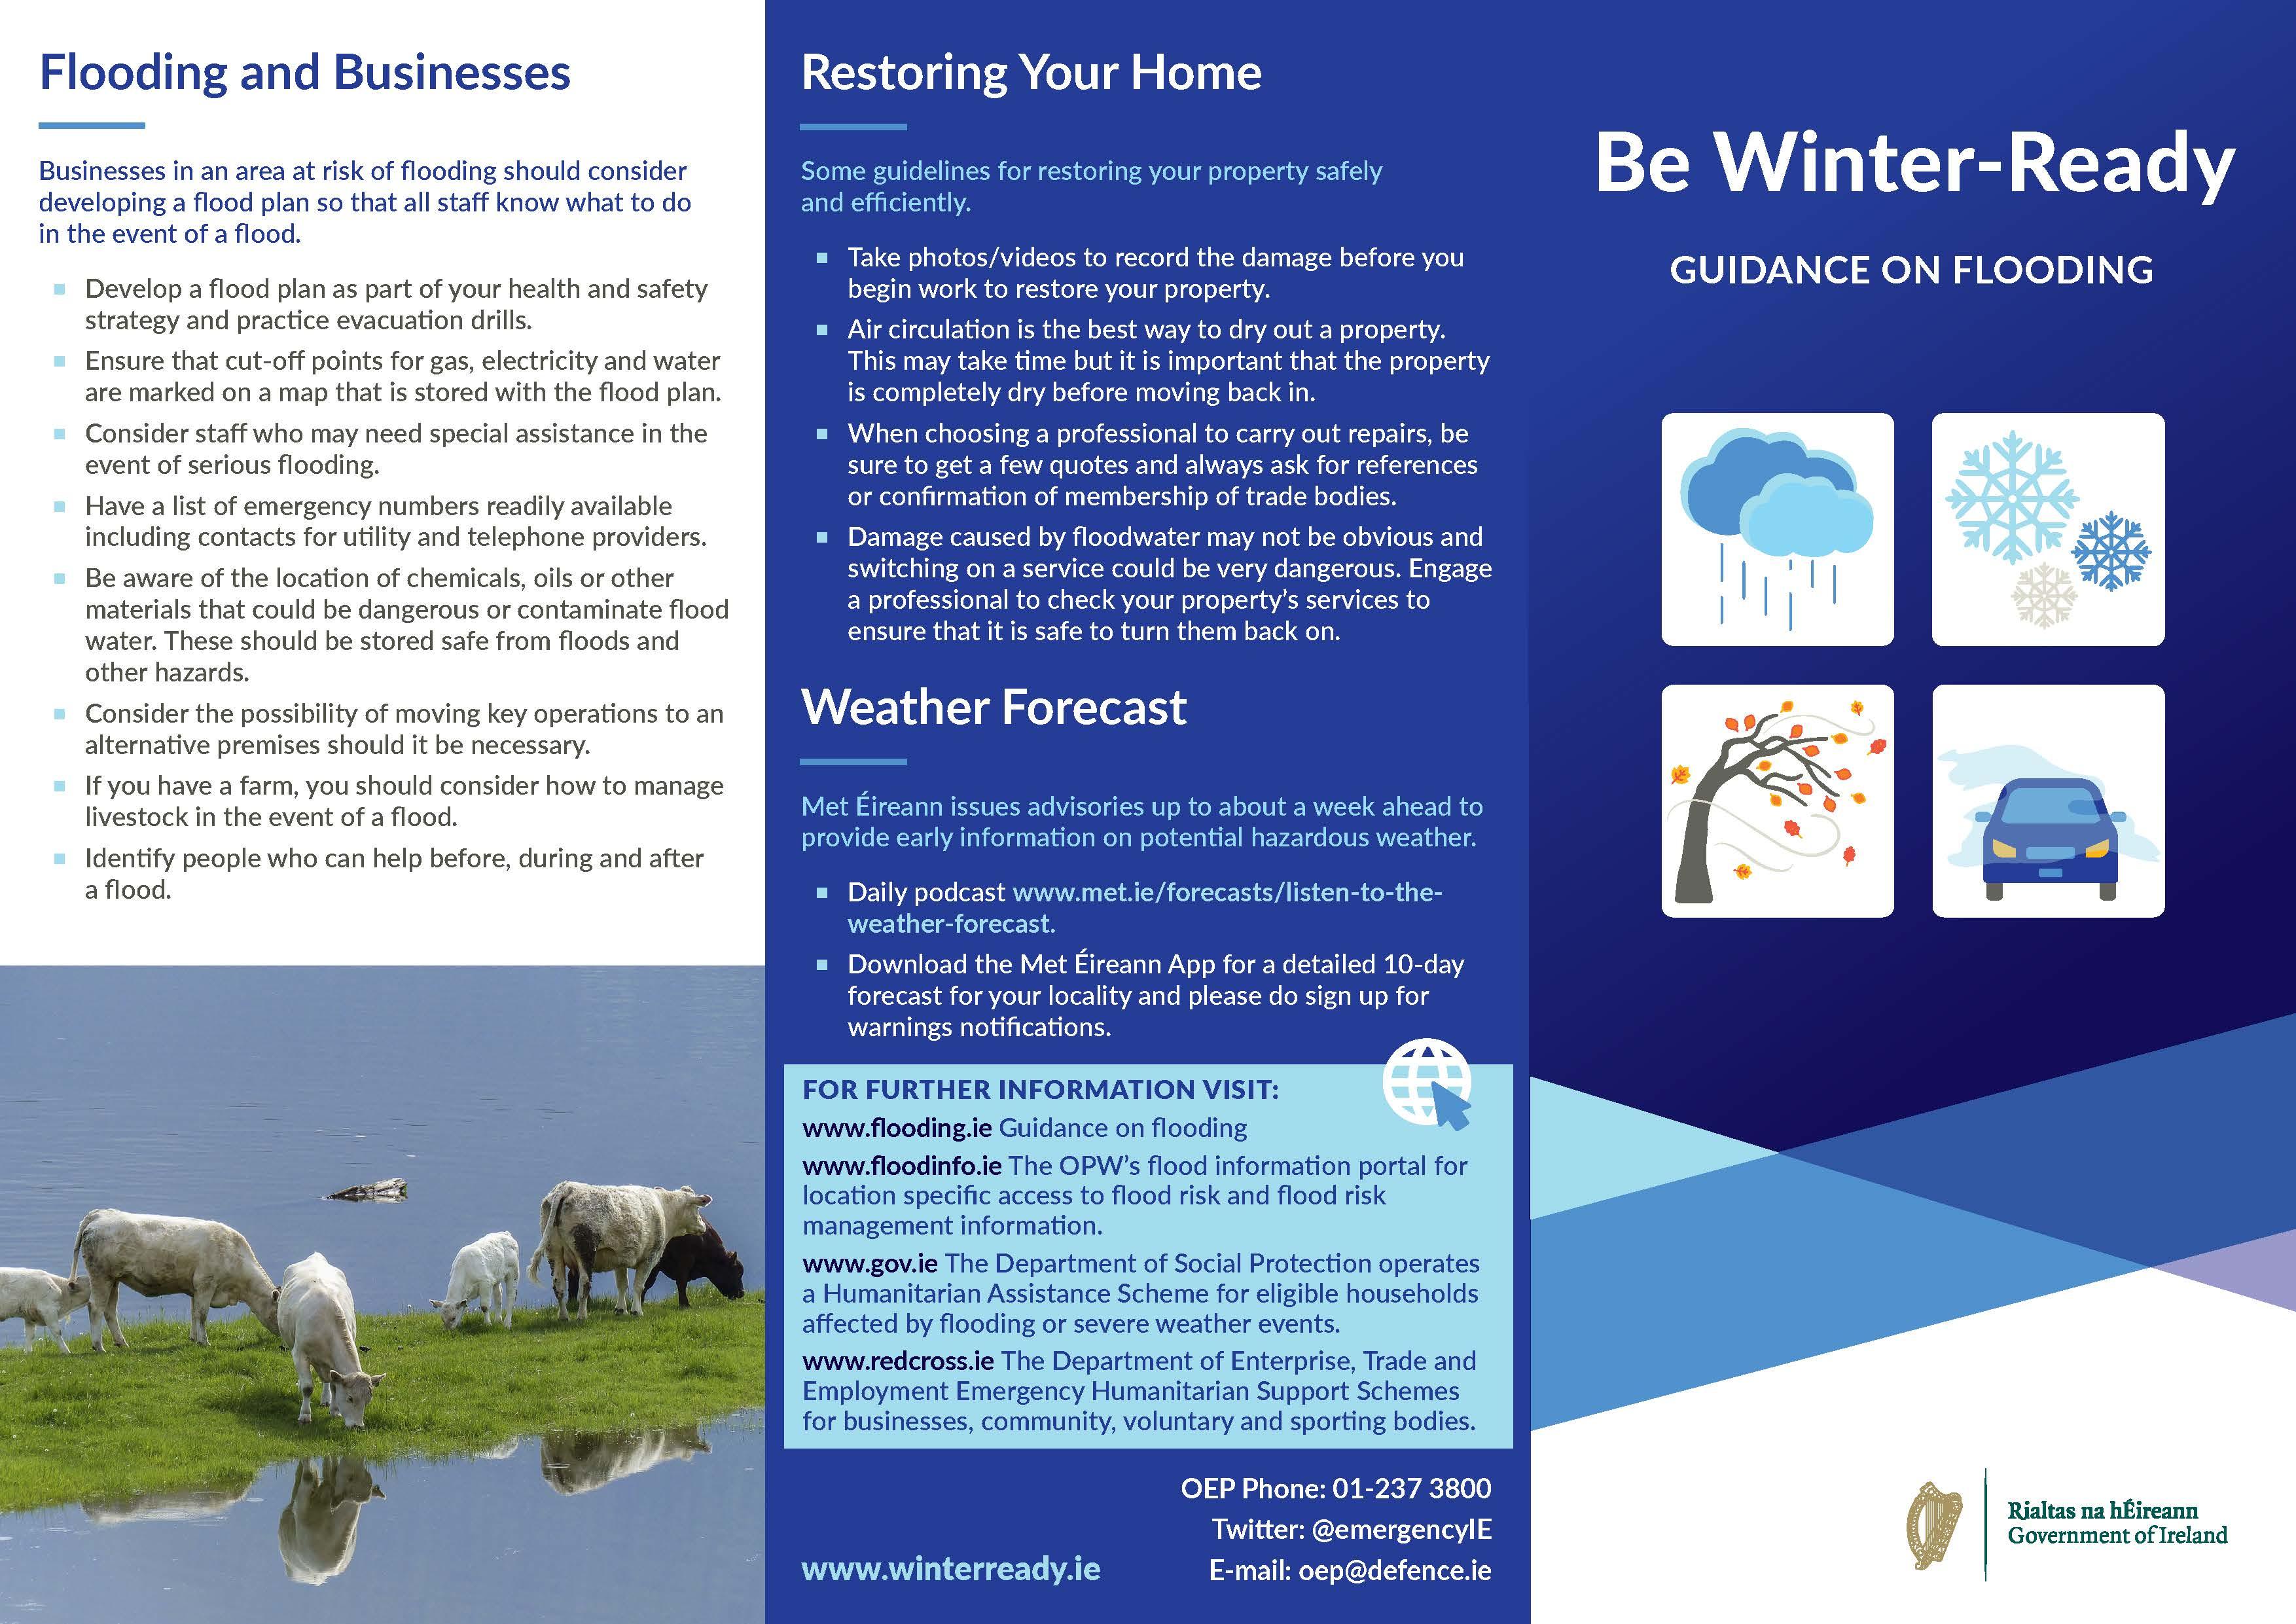 Be Winter ready guidance on flooding